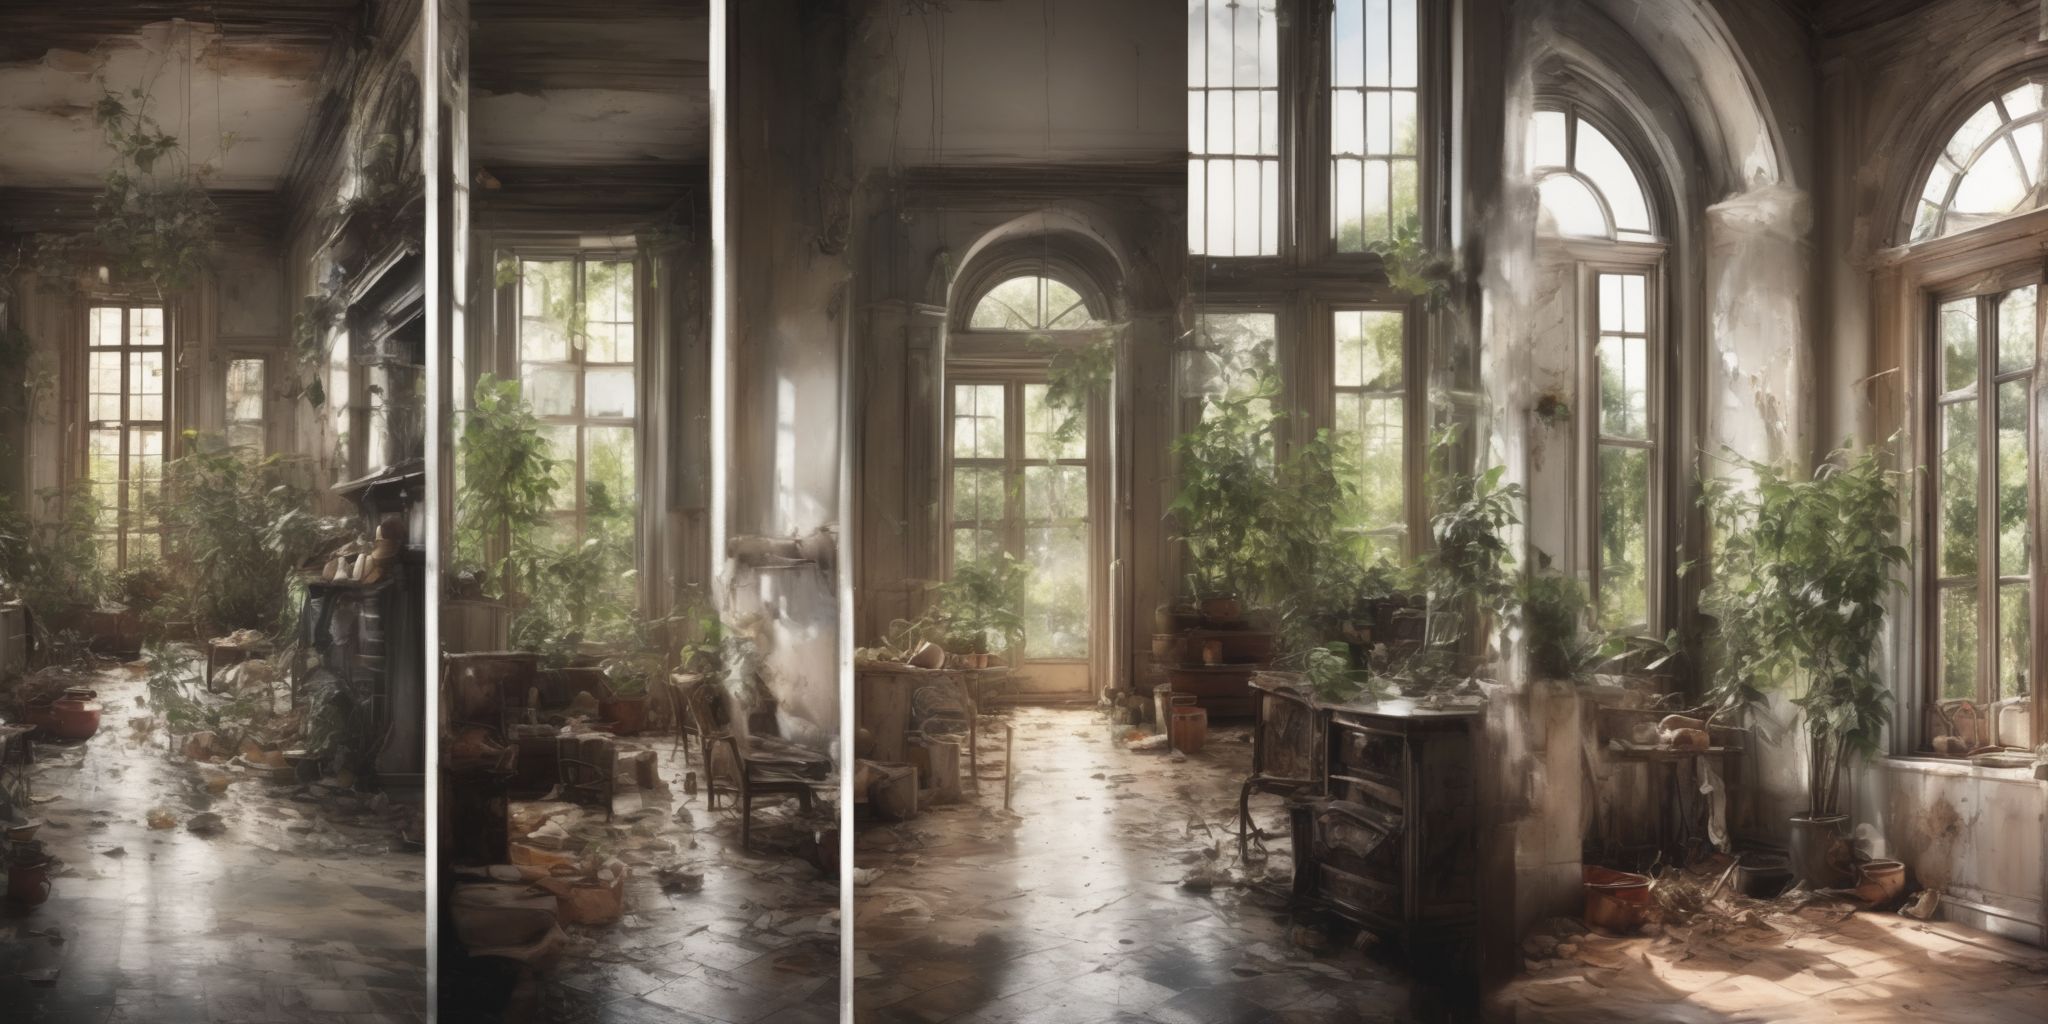 Transition  in realistic, photographic style